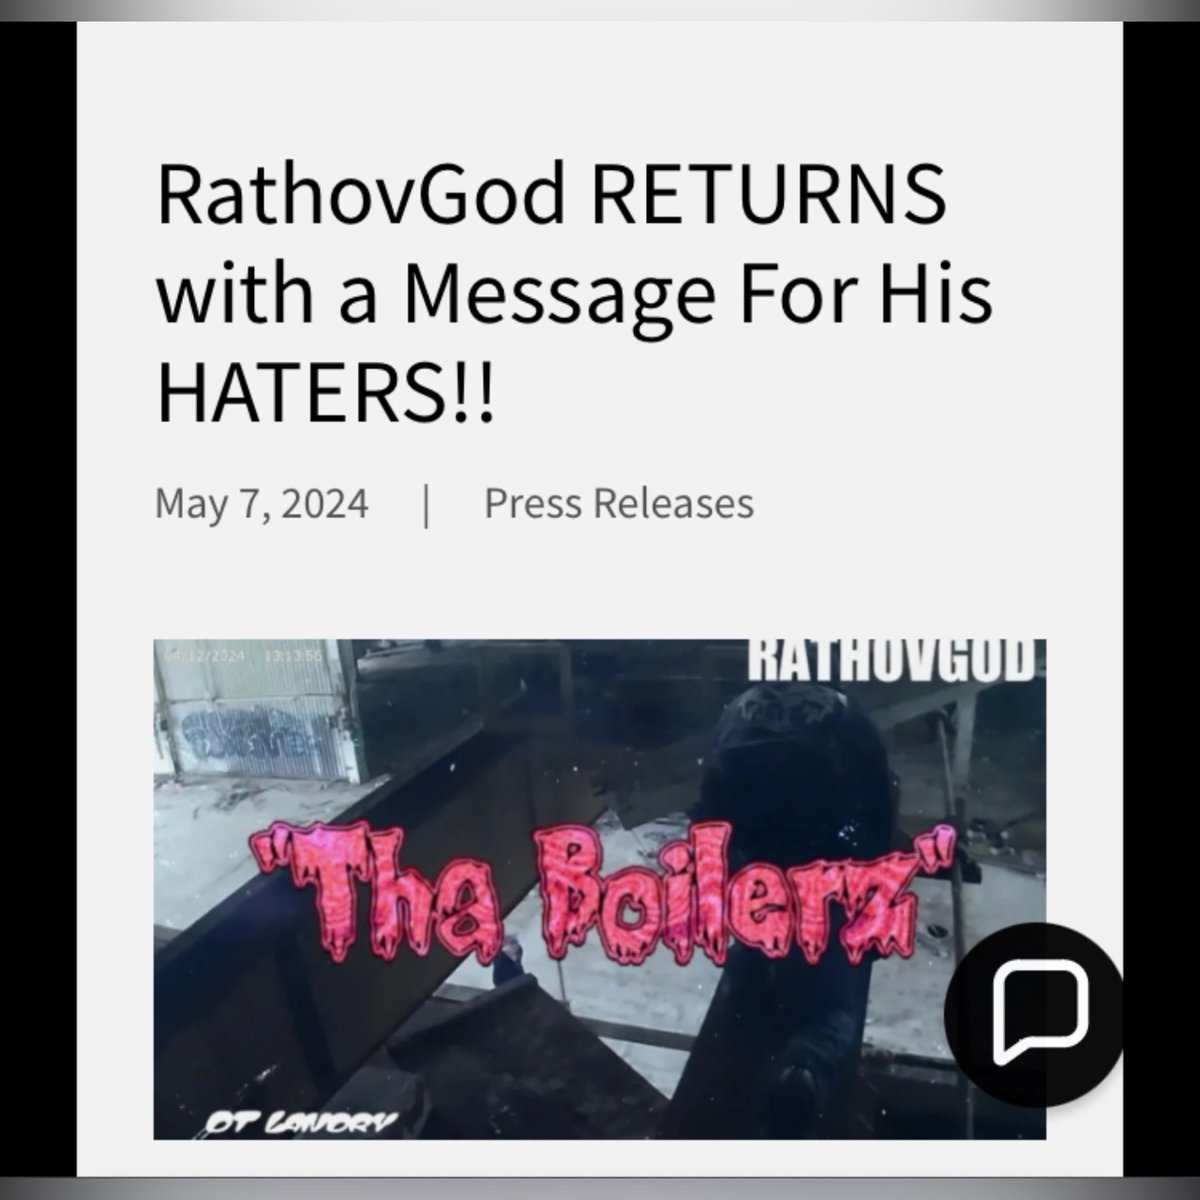 RathovGod is back and he’s back with a vengeance ‼️ don’t miss out on his message to the haters 🥊 click the link below to see what RathovGod has in store‼️ - i.mtr.cool/pcddgesskn - #MMInc #RathovGod #KansasCityMO #KCMO #SupportIndieArtists #PressReleases #Youtube